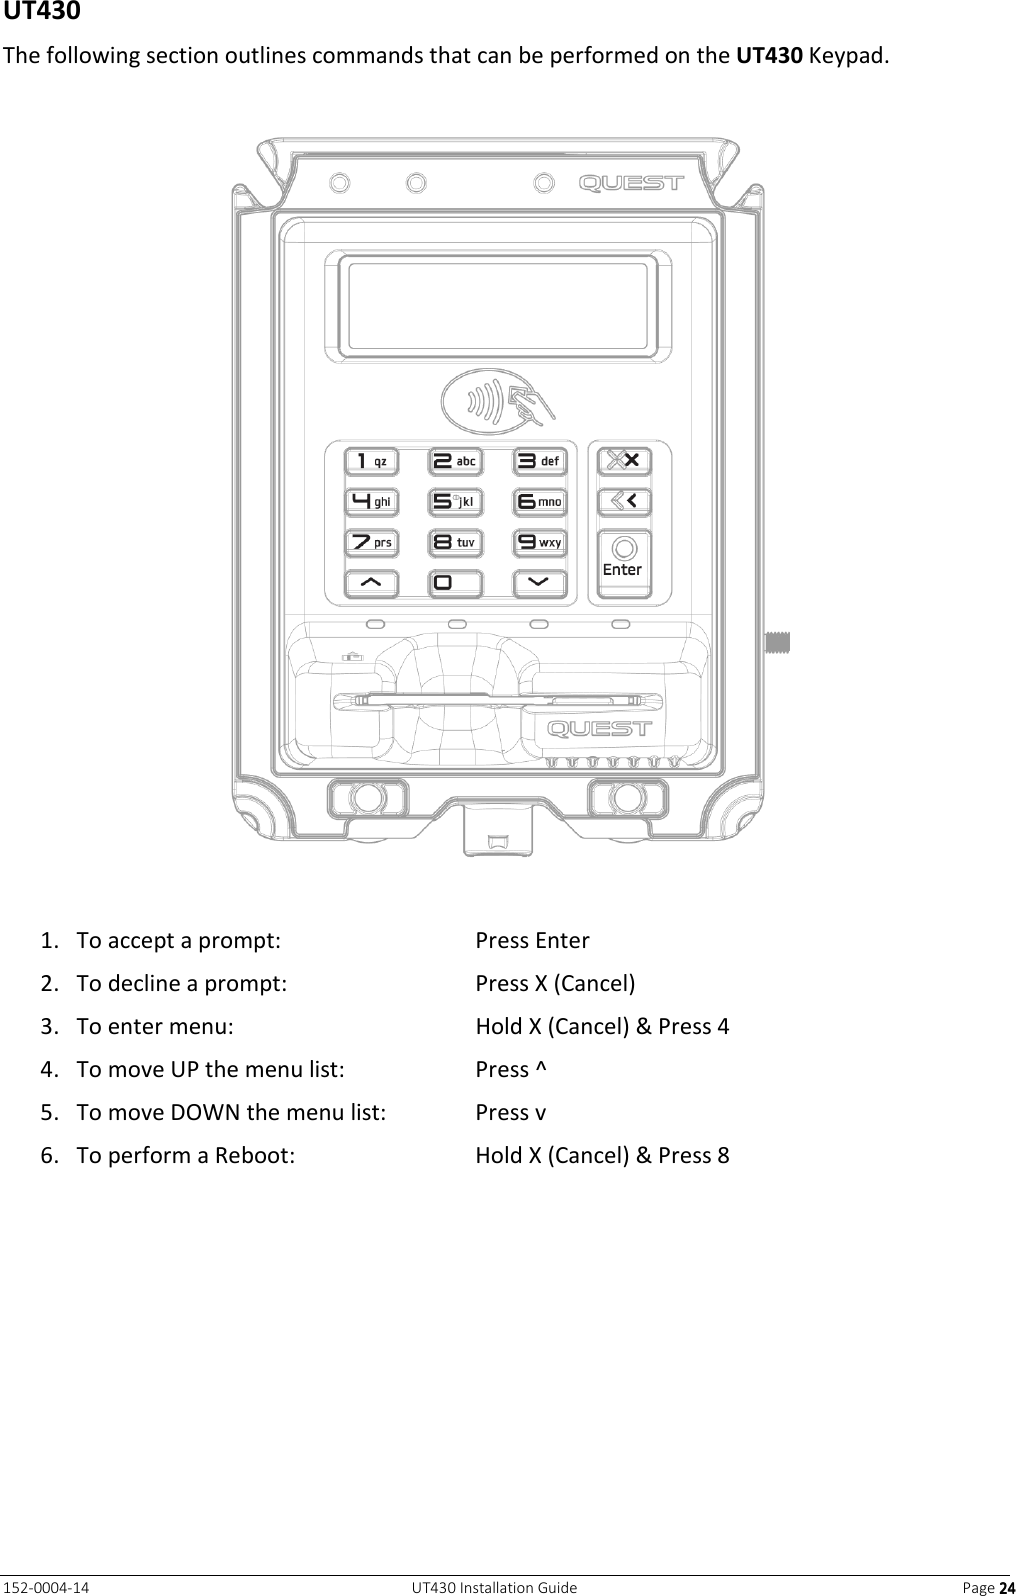   152-0004-14  UT430 Installation Guide  Page 24242424  UT430 The following section outlines commands that can be performed on the UT430 Keypad.    1. To accept a prompt:  Press Enter 2. To decline a prompt:  Press X (Cancel) 3. To enter menu:  Hold X (Cancel) &amp; Press 4 4. To move UP the menu list:  Press ^   5. To move DOWN the menu list:  Press v   6. To perform a Reboot:  Hold X (Cancel) &amp; Press 8   